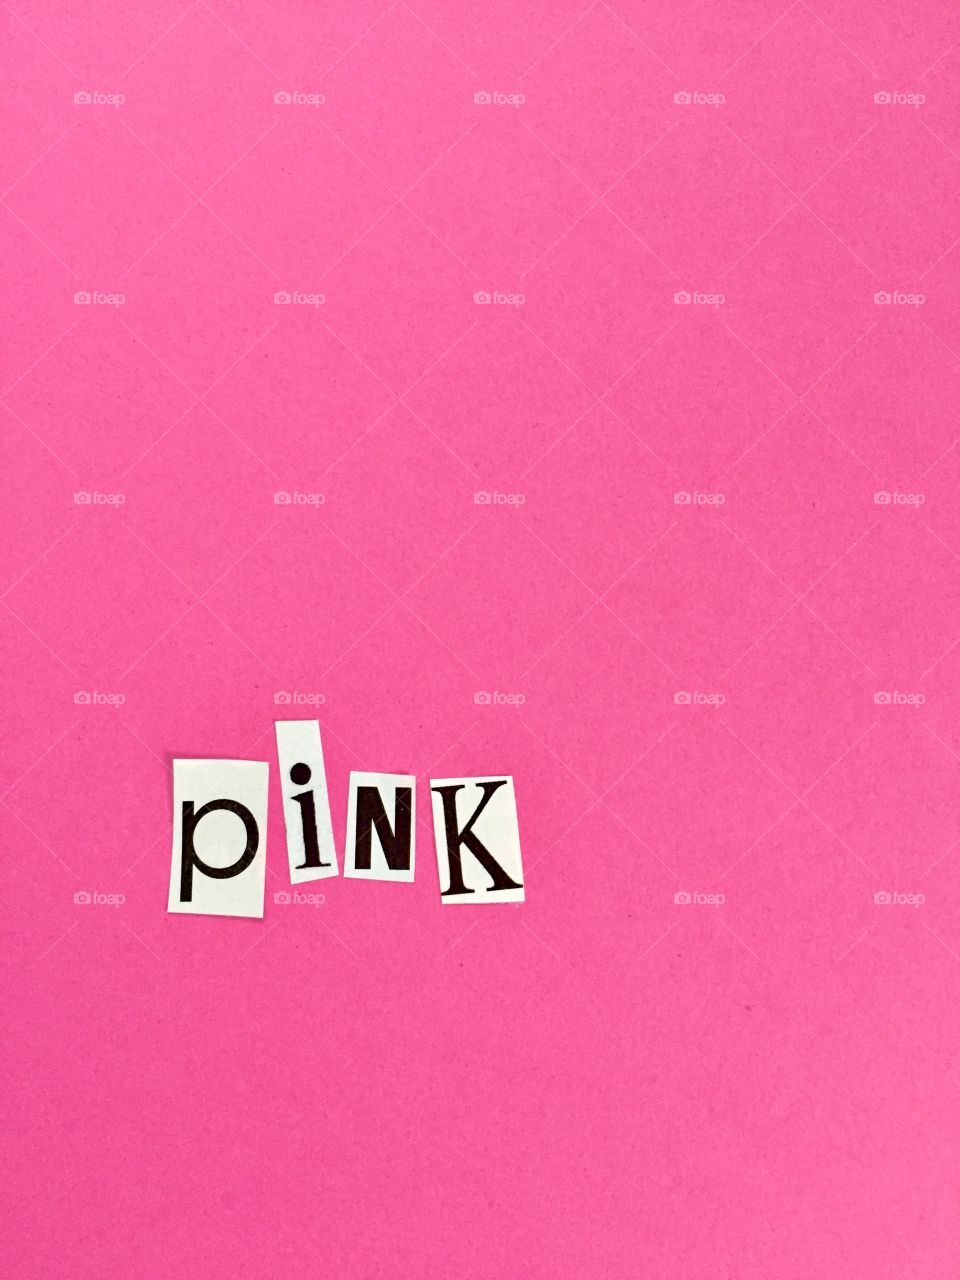 Pink text written on pink background